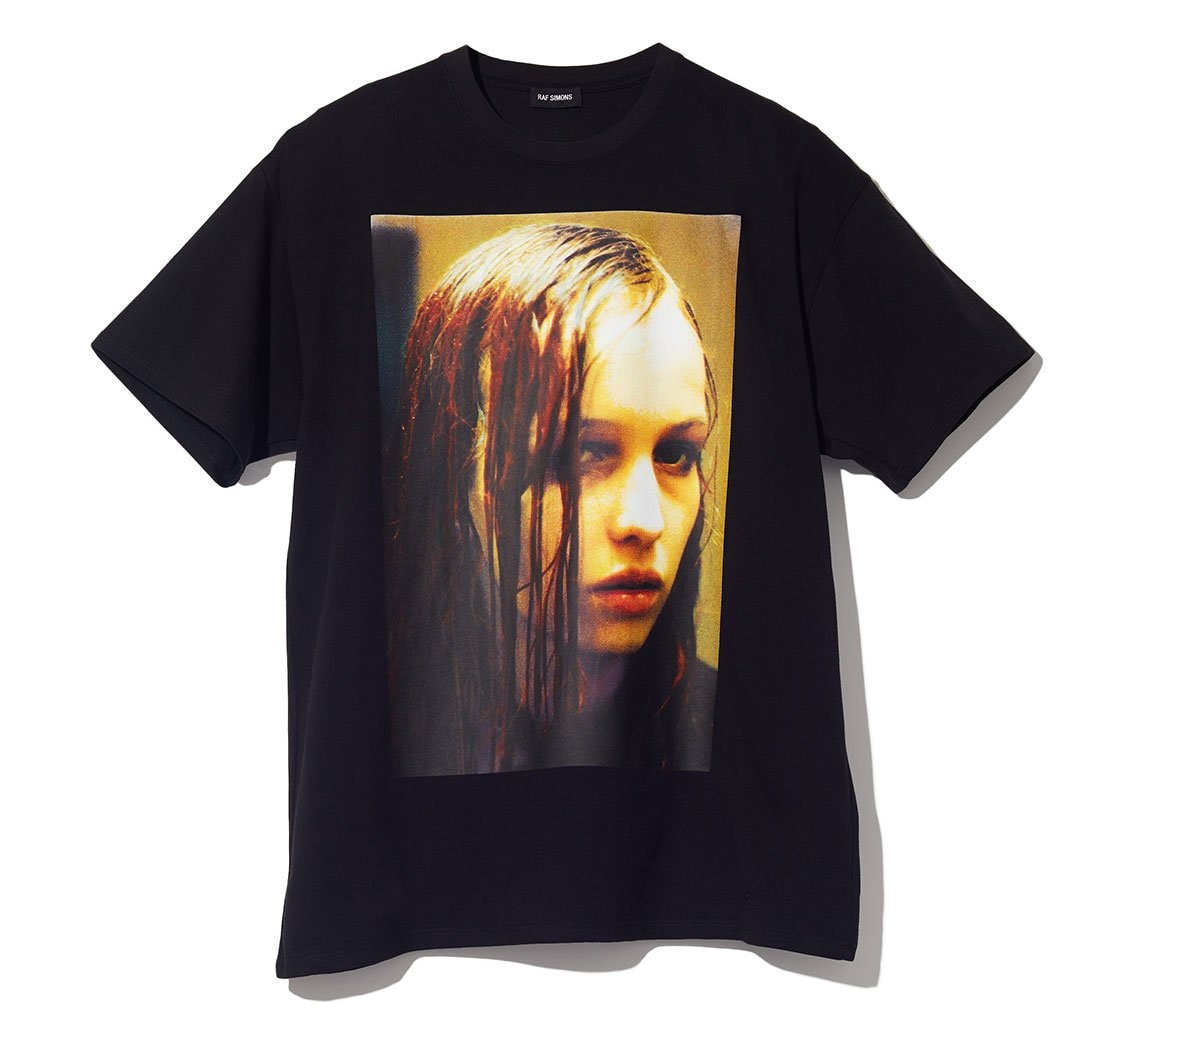 Raf Simons Christiane F. wir Kinder vom Bahnhof Zoo Collaboration drop collection fall winter 2018 release limited commemorative We Children from Bahnhof Zoo